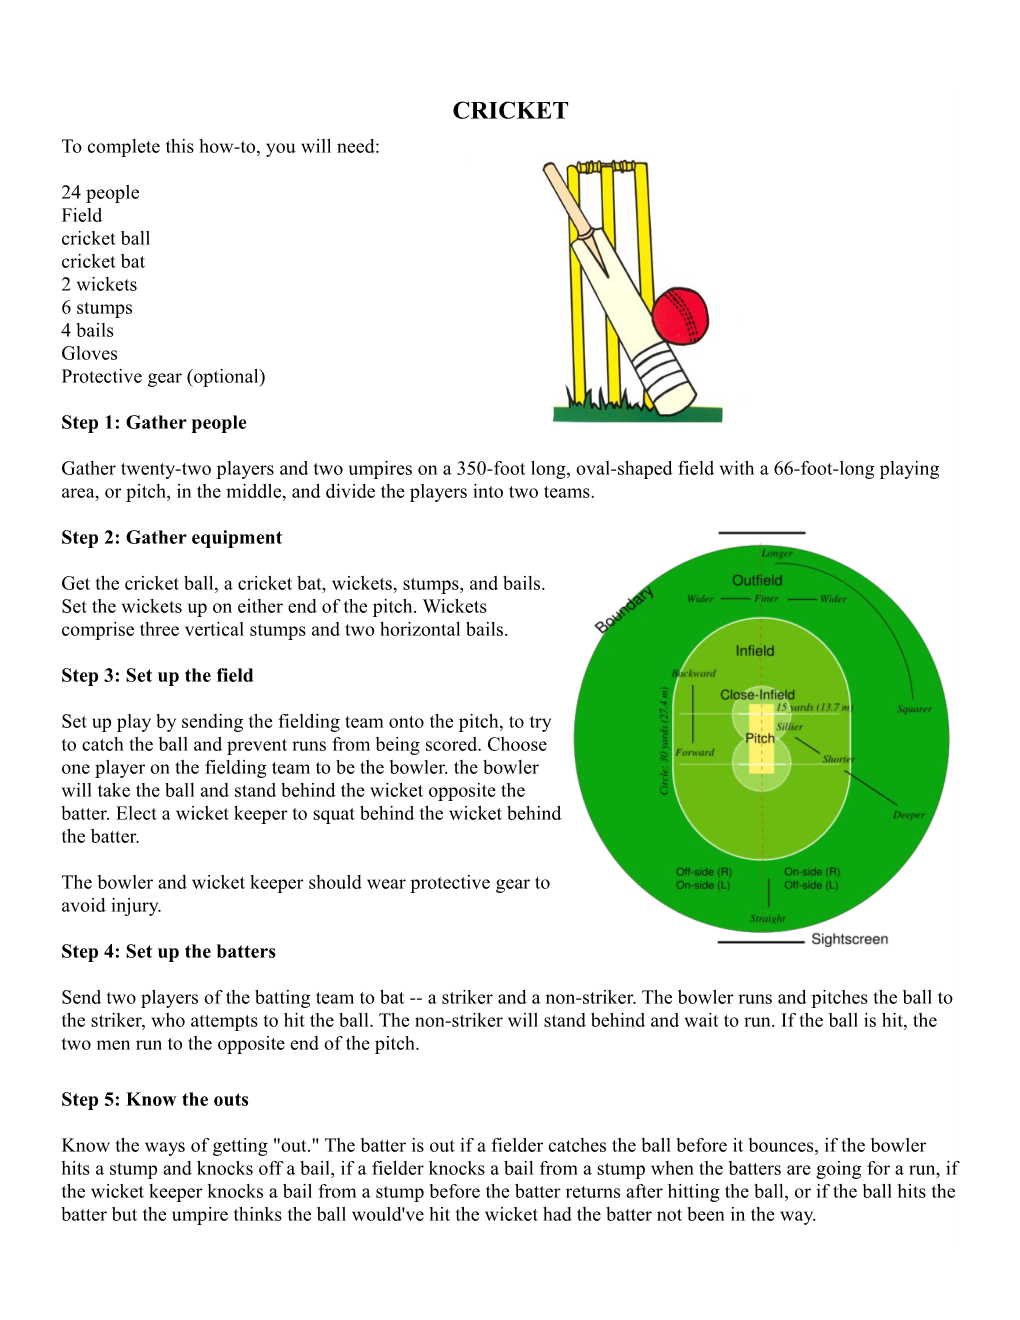 CRICKET to Complete This How-To, You Will Need